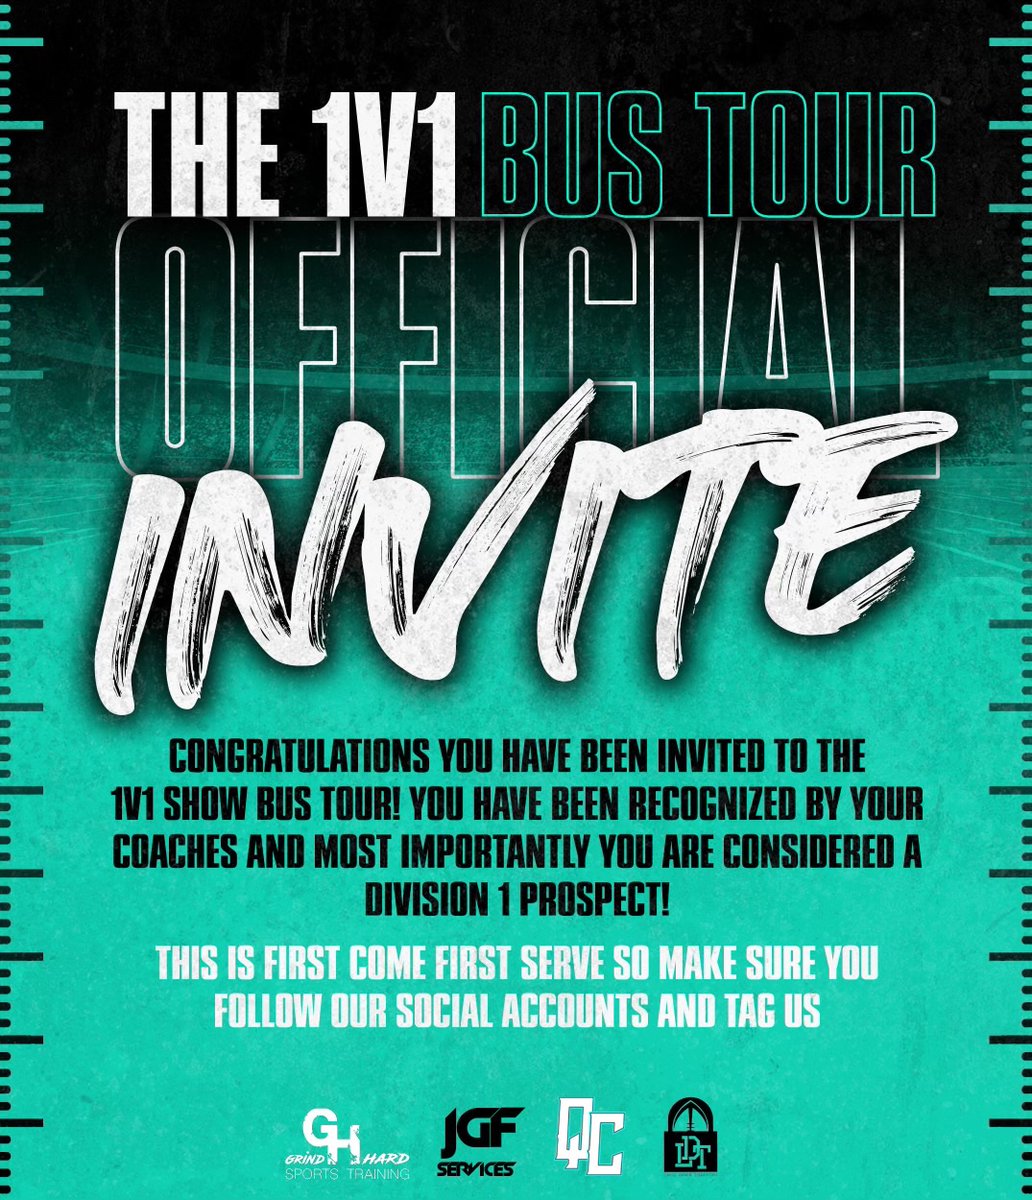 Blessed to be invited and showcase my skills! @1v1Show_ @Mrlockdown_92 @GHFootwork @JibrilleFewell @coachcredle4